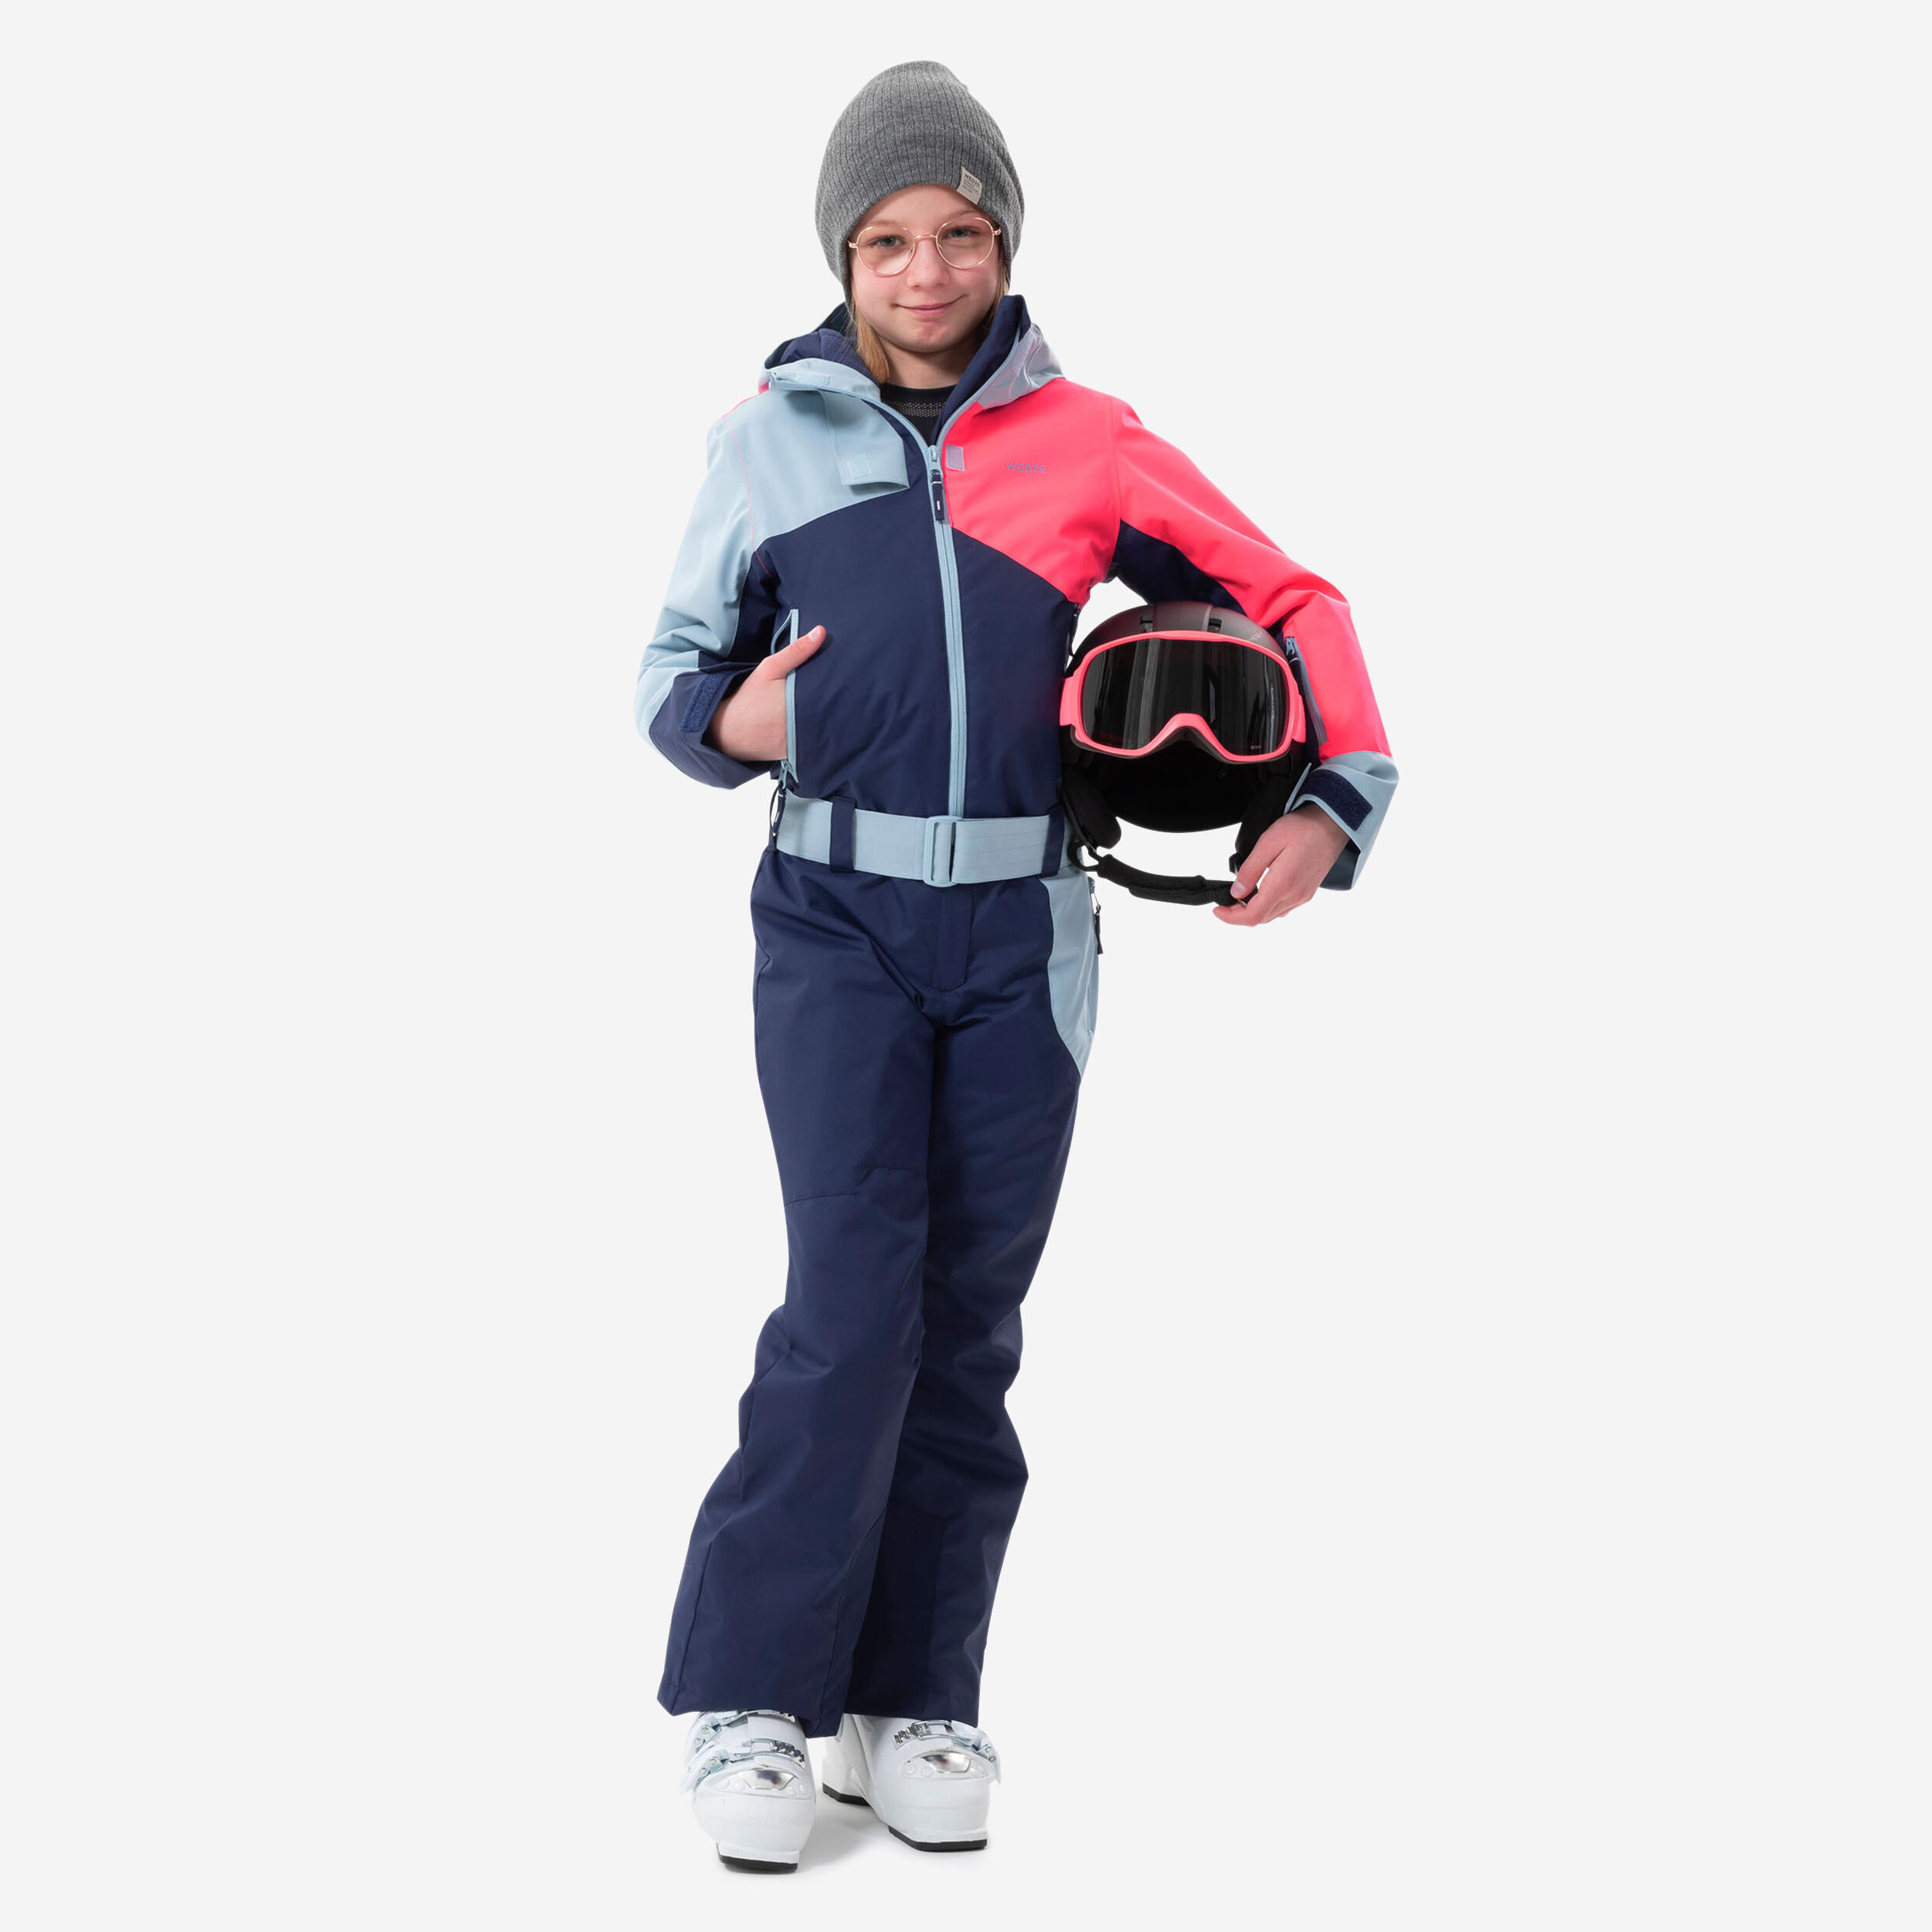 KIDS’ WARM AND WATERPROOF SKI SUIT 500 PINK AND BLUE 1/11